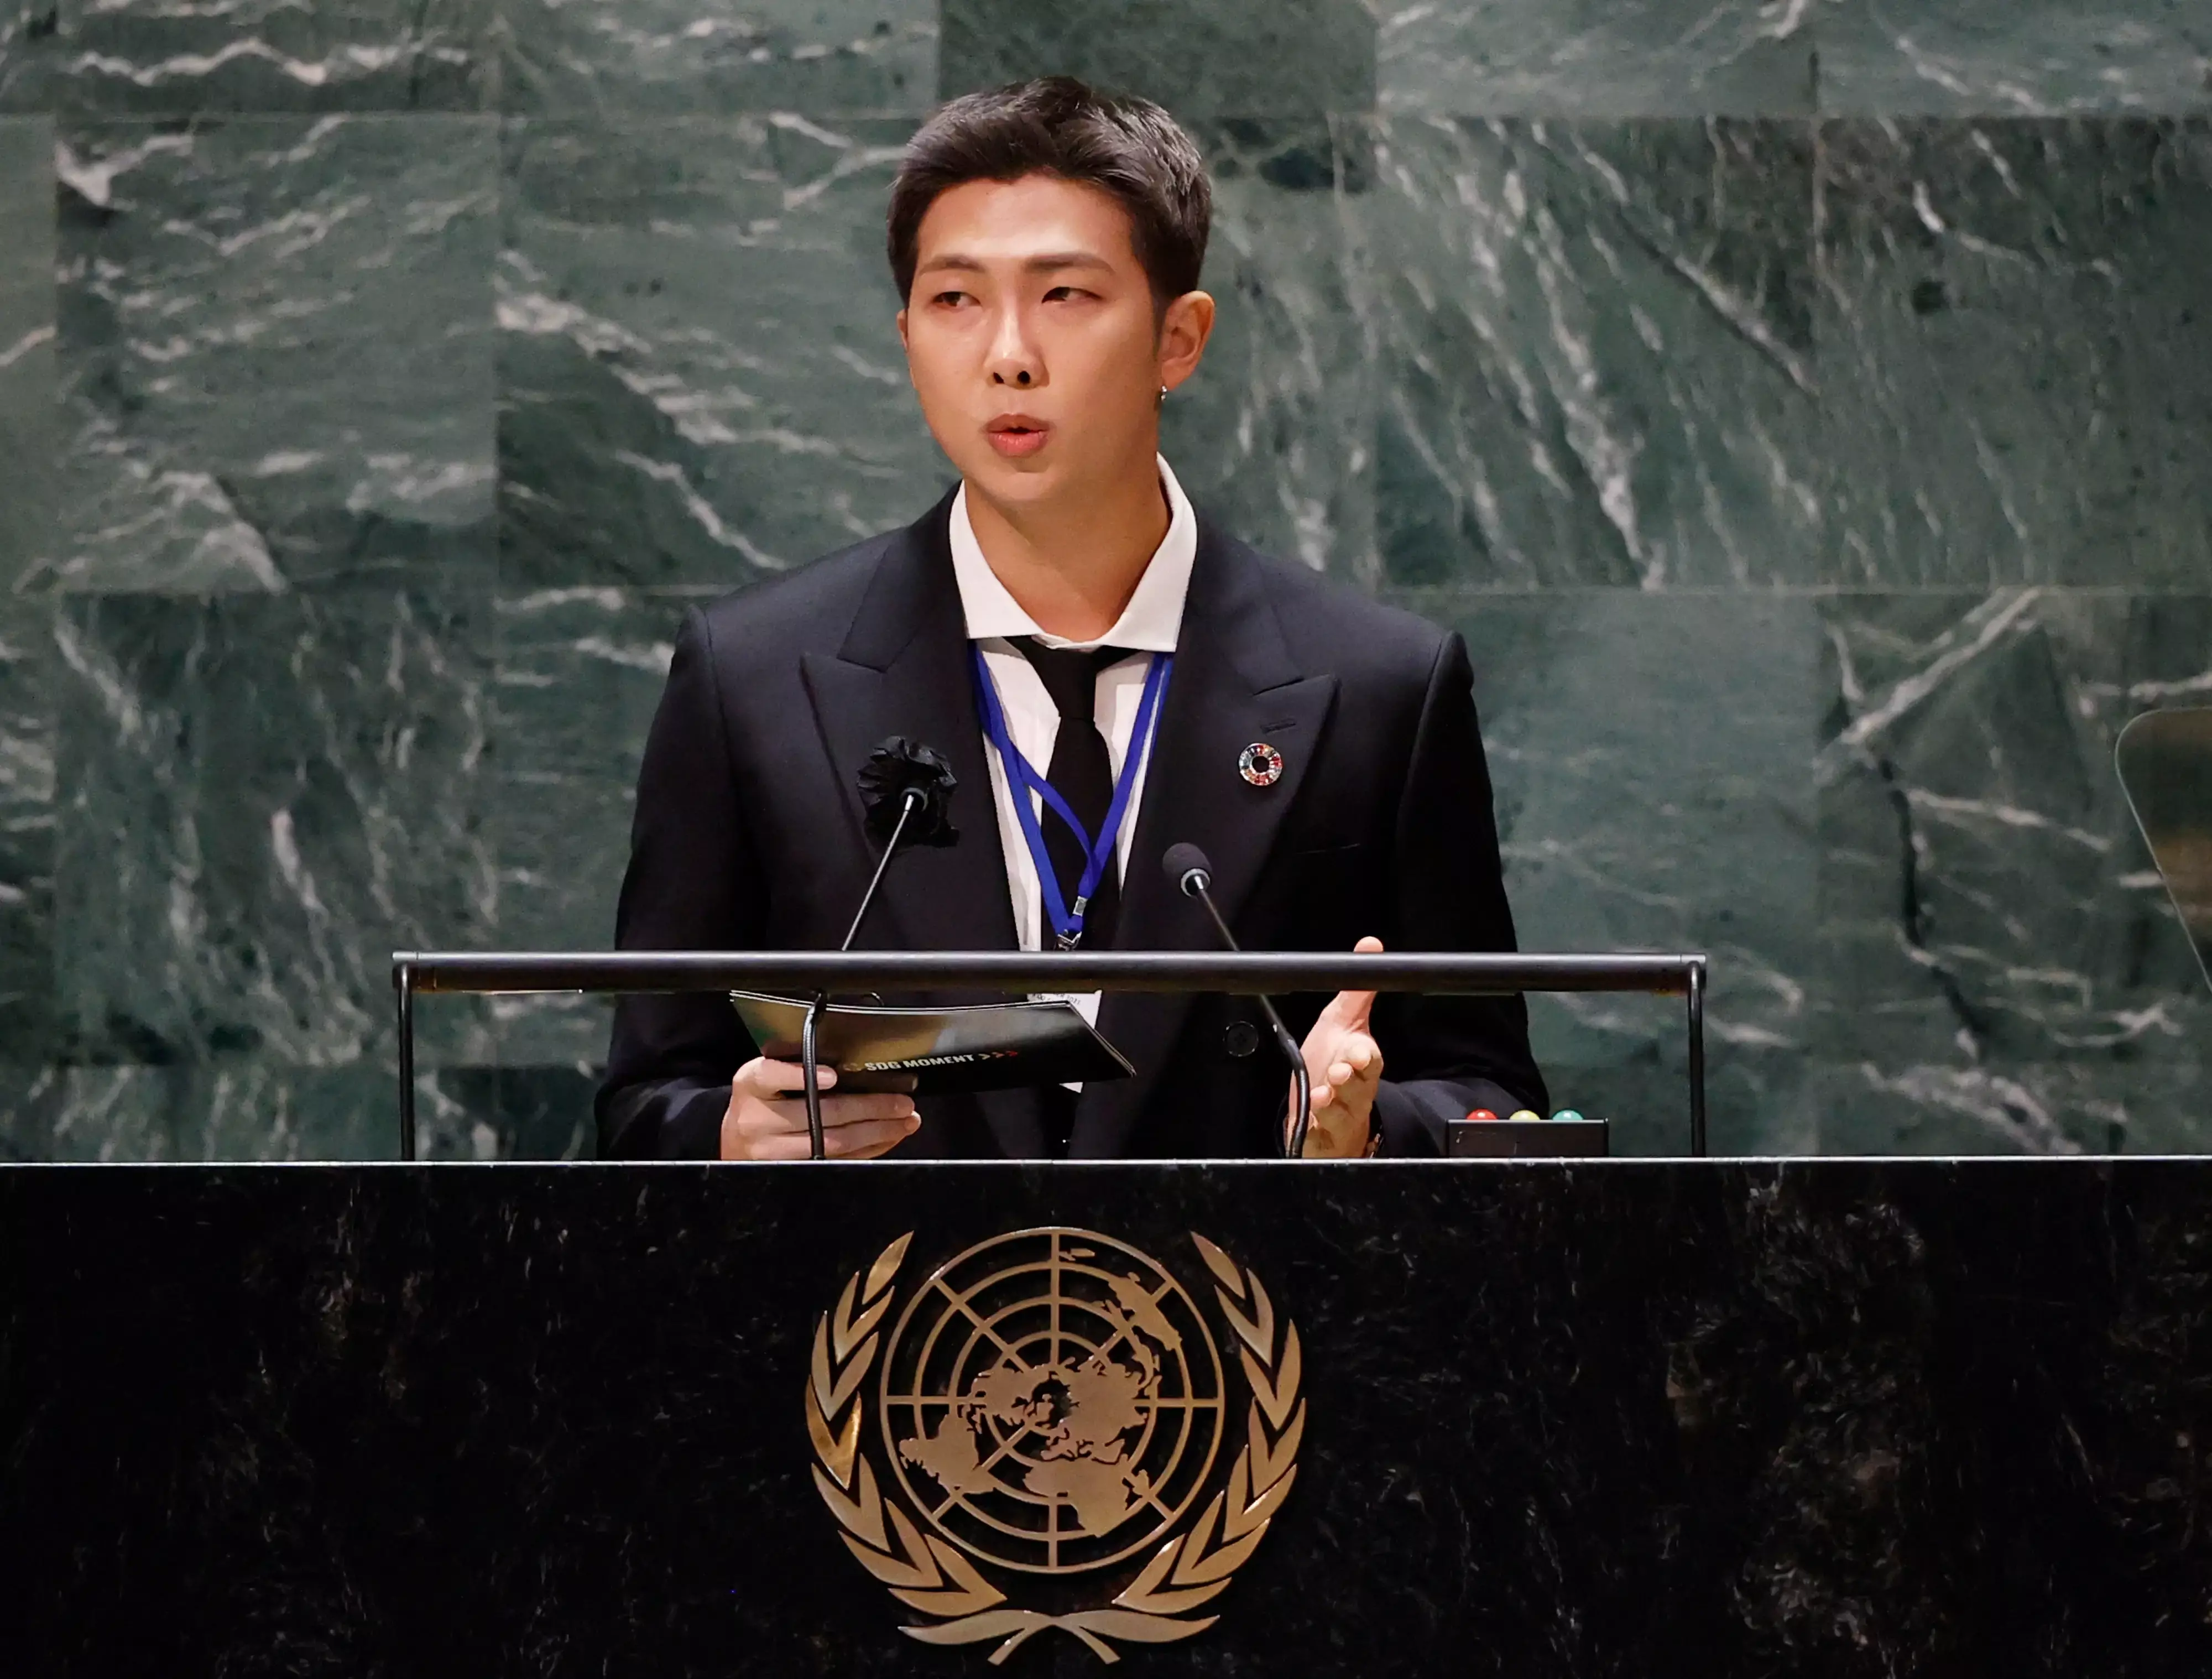 Rap Monster gives very inspiring speech at the United Nations headquarters in New York City during its Generation Unlimited ceremonial event.